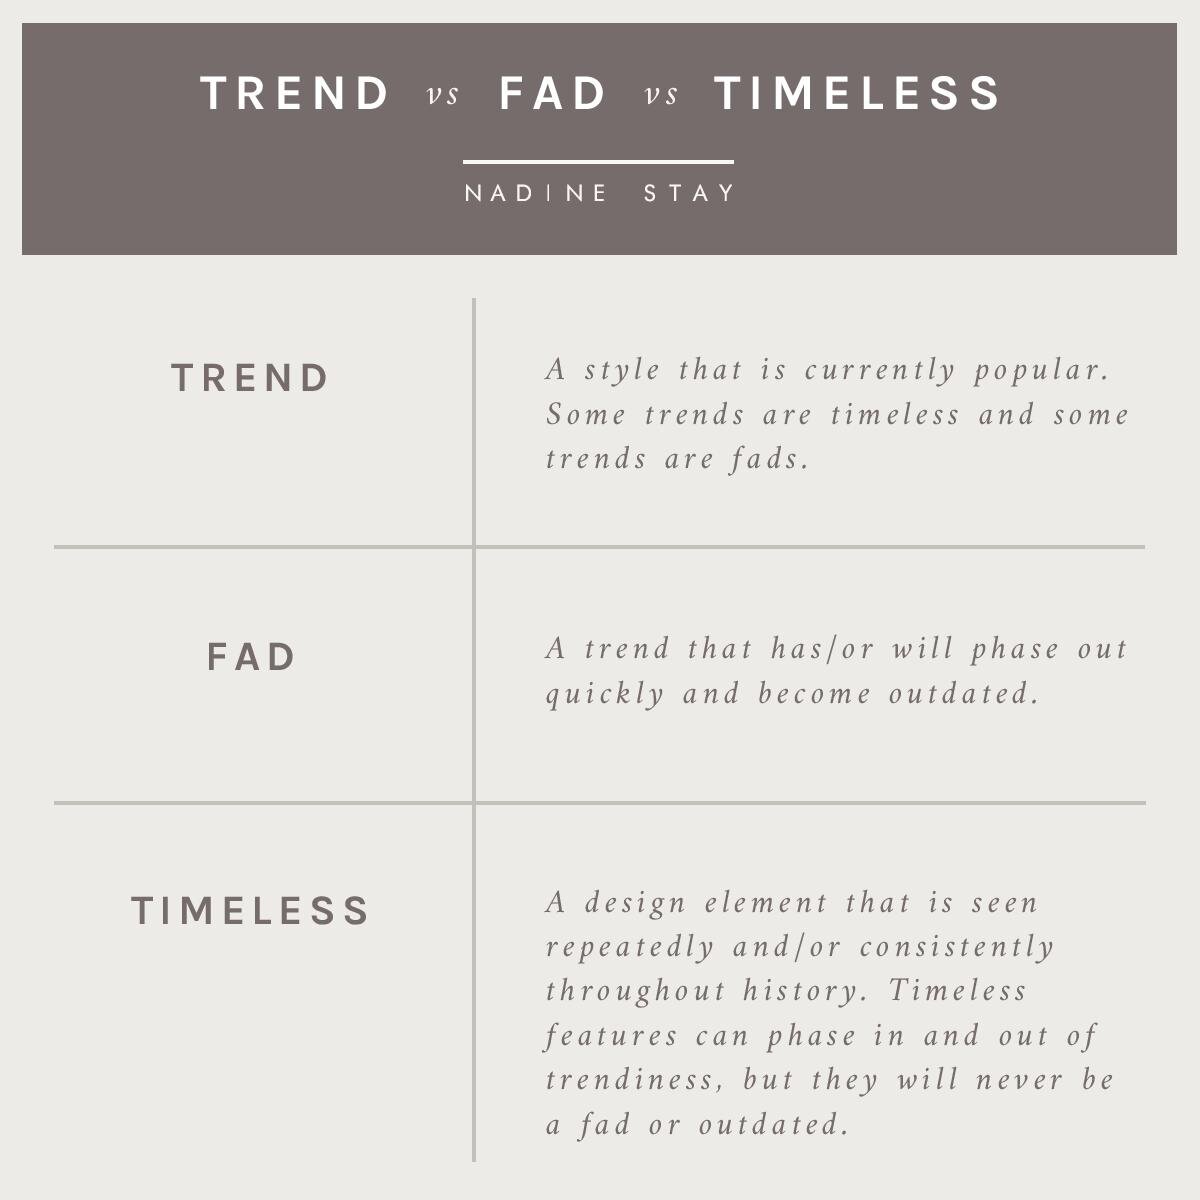 Trend vs Fad vs Timeless design style definition by Nadine Stay | What's the difference between trends vs fads? How to determine if a style is trendy or classic?